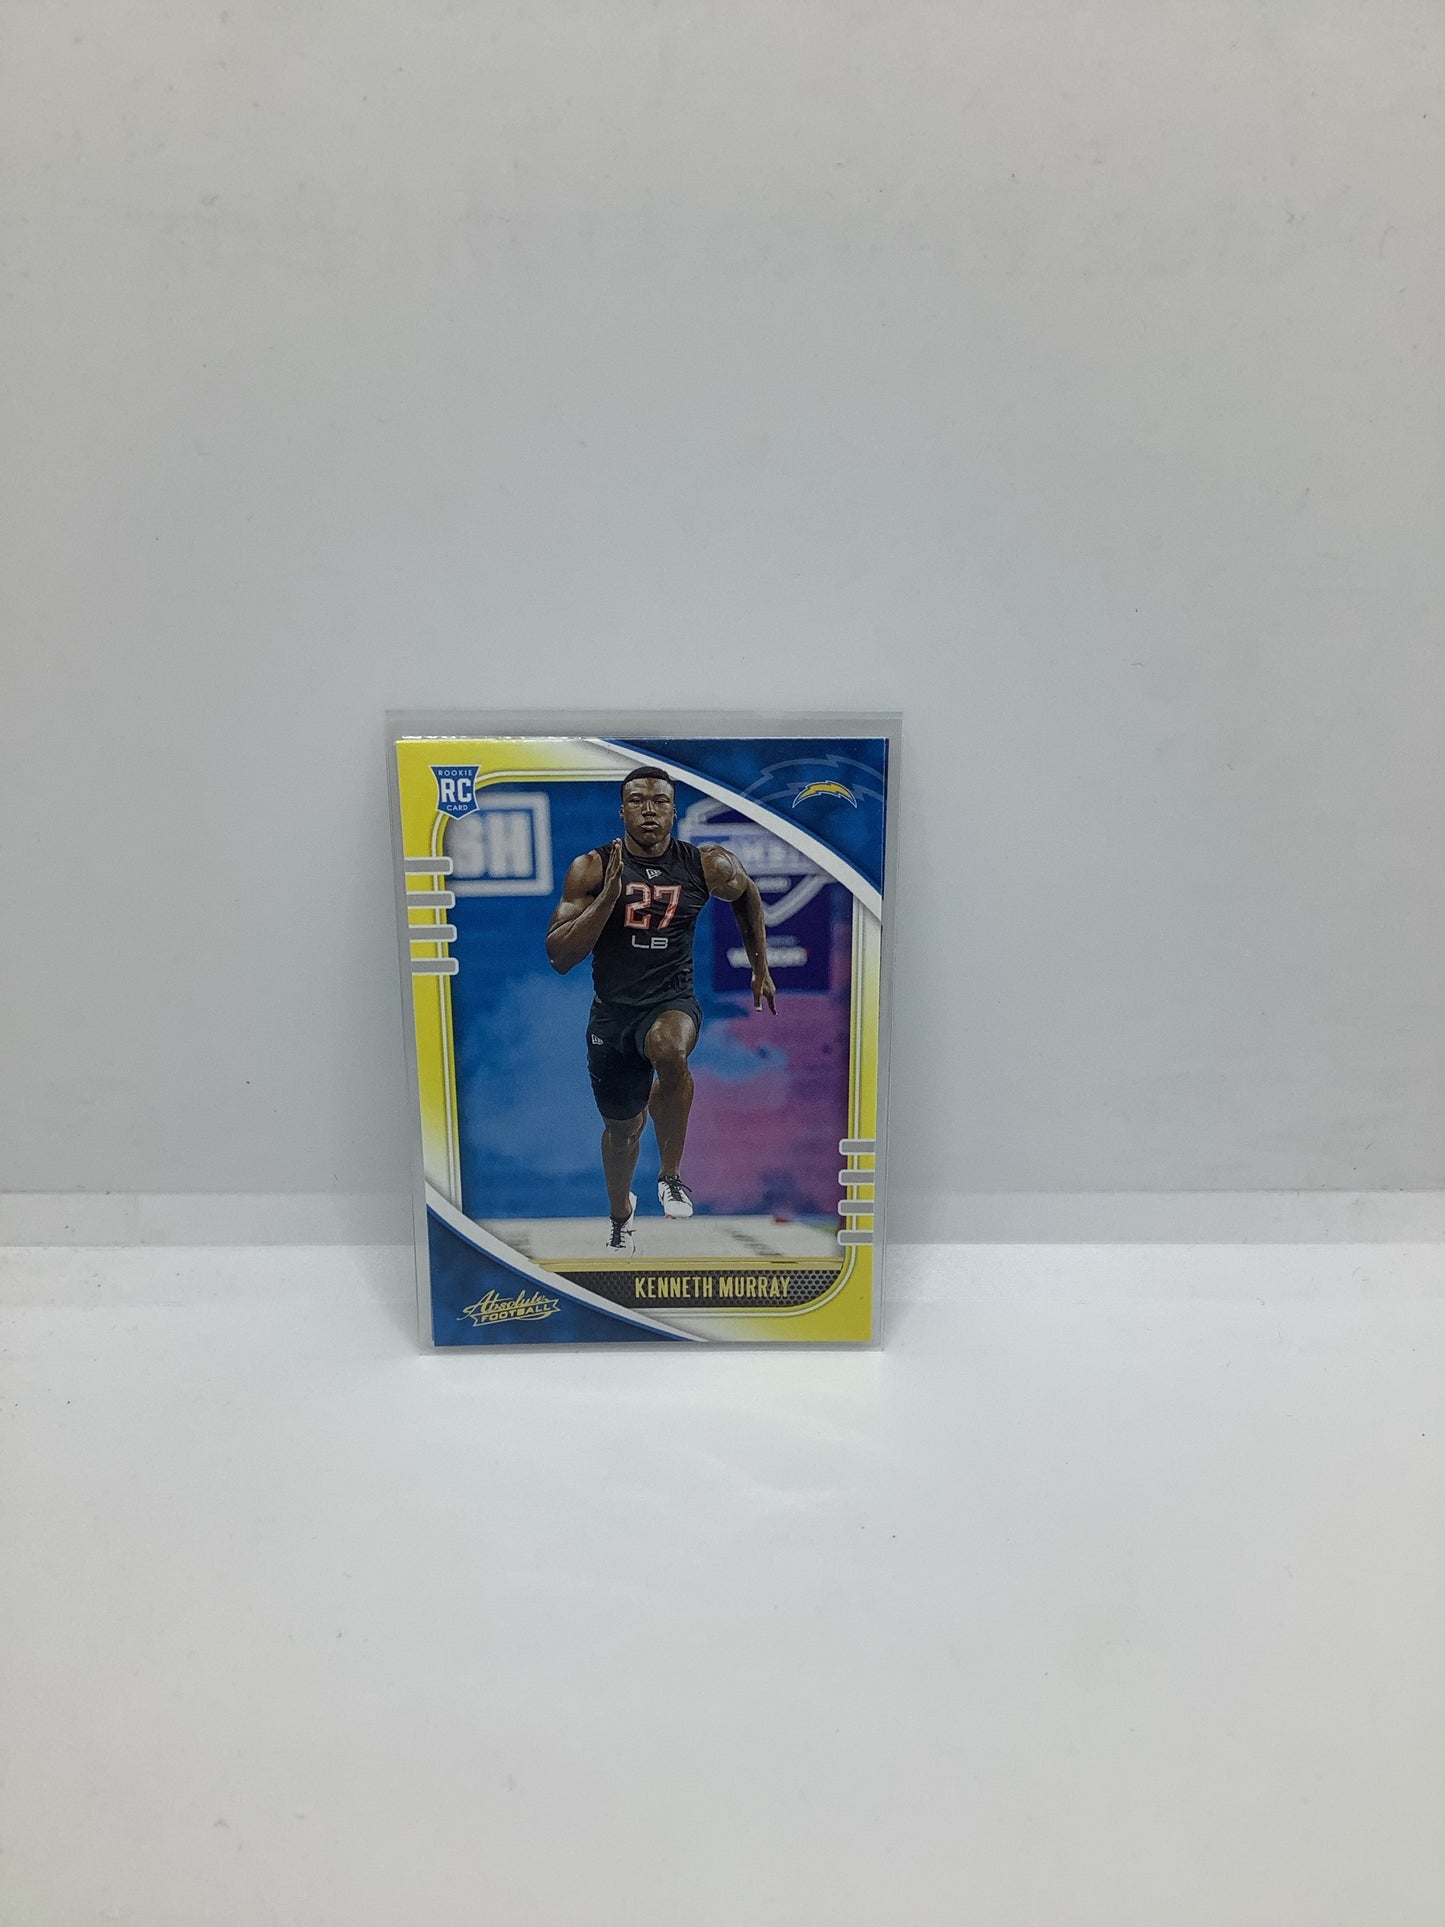 2020 Absolute Kenneth Murray RC Yellow Blue